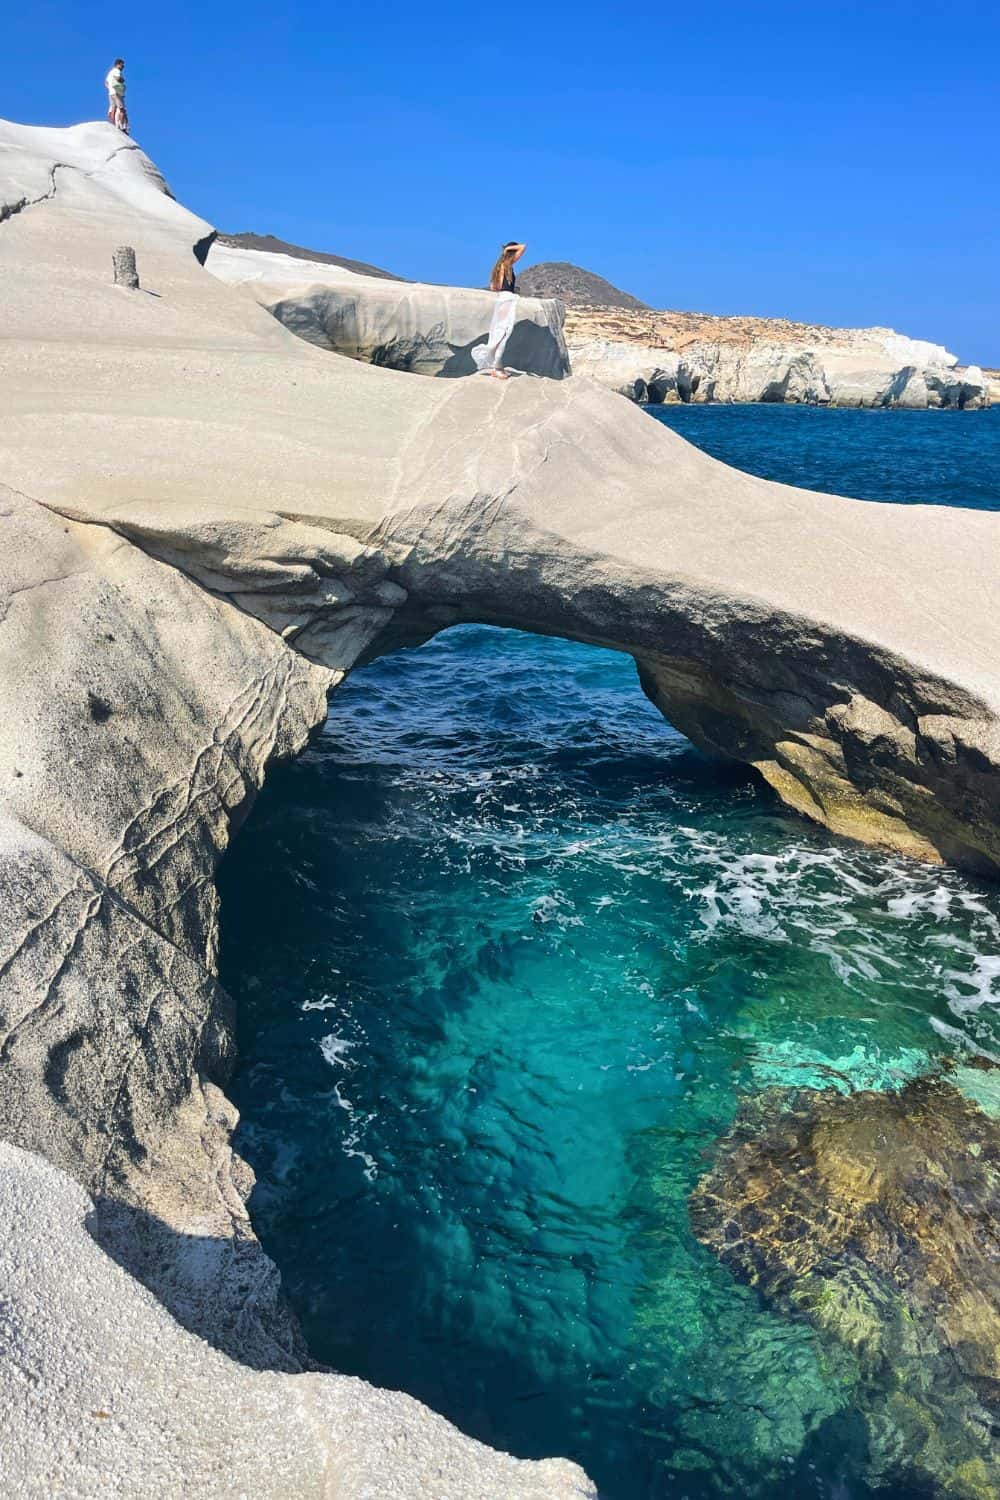 A striking photograph showcasing the geological beauty of Milos with its white rock formations creating a natural bridge over the clear turquoise waters. Two people are seen standing atop the formation, giving a sense of scale and adventure.